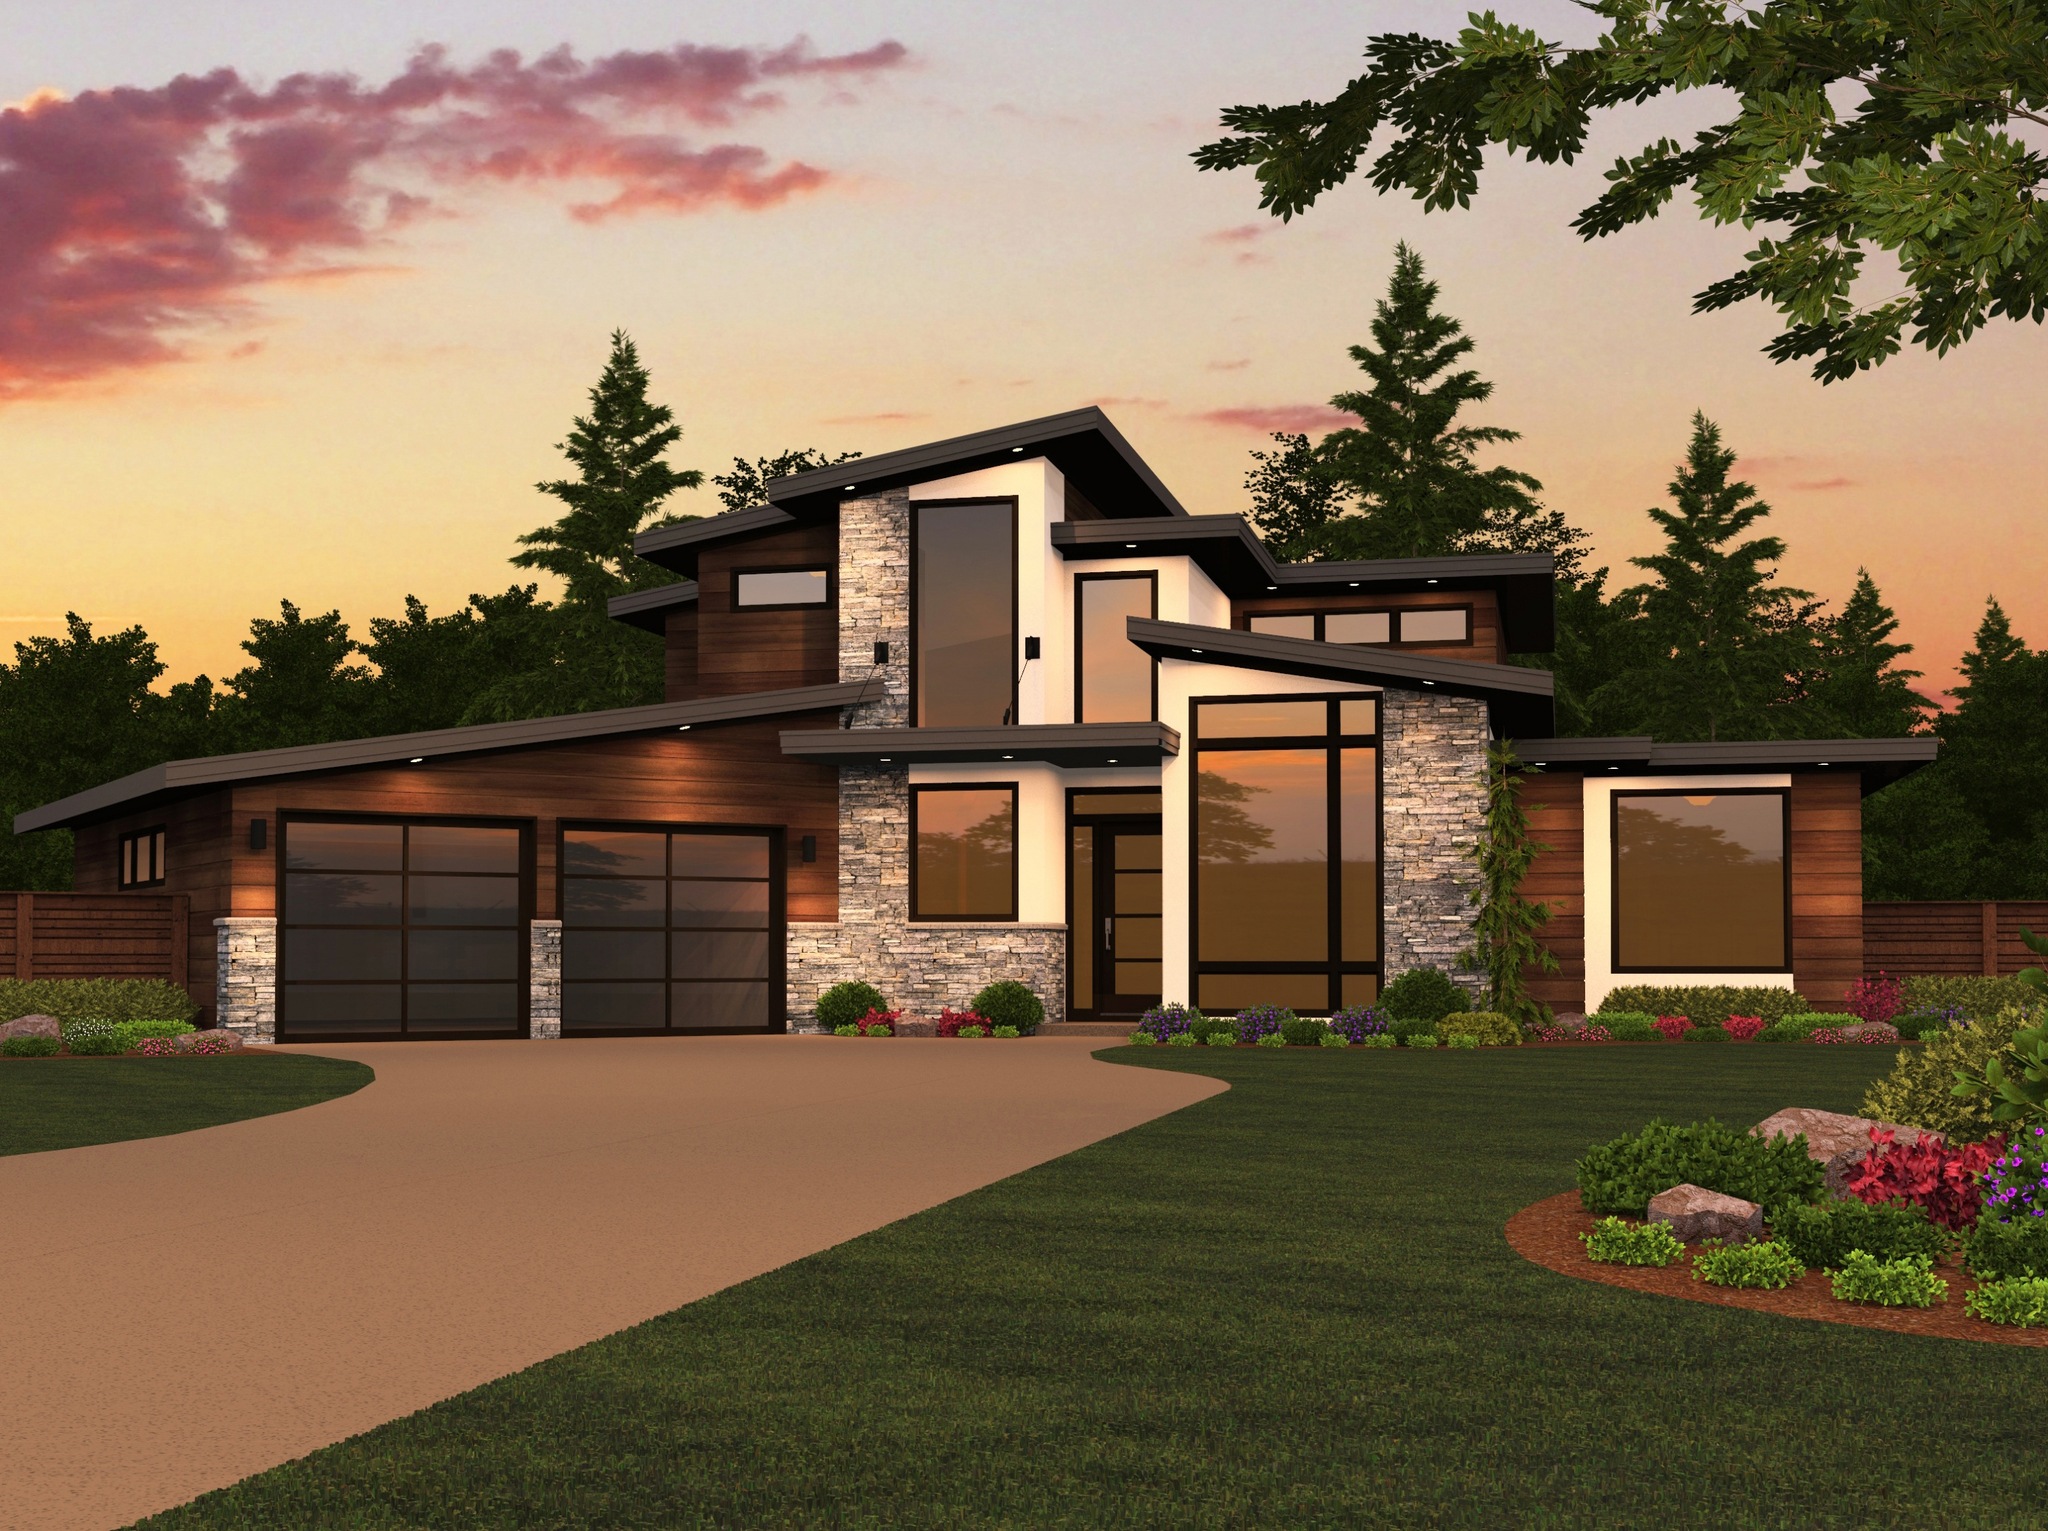 Dallas House Plan 2 Story Modern House Design Plans with